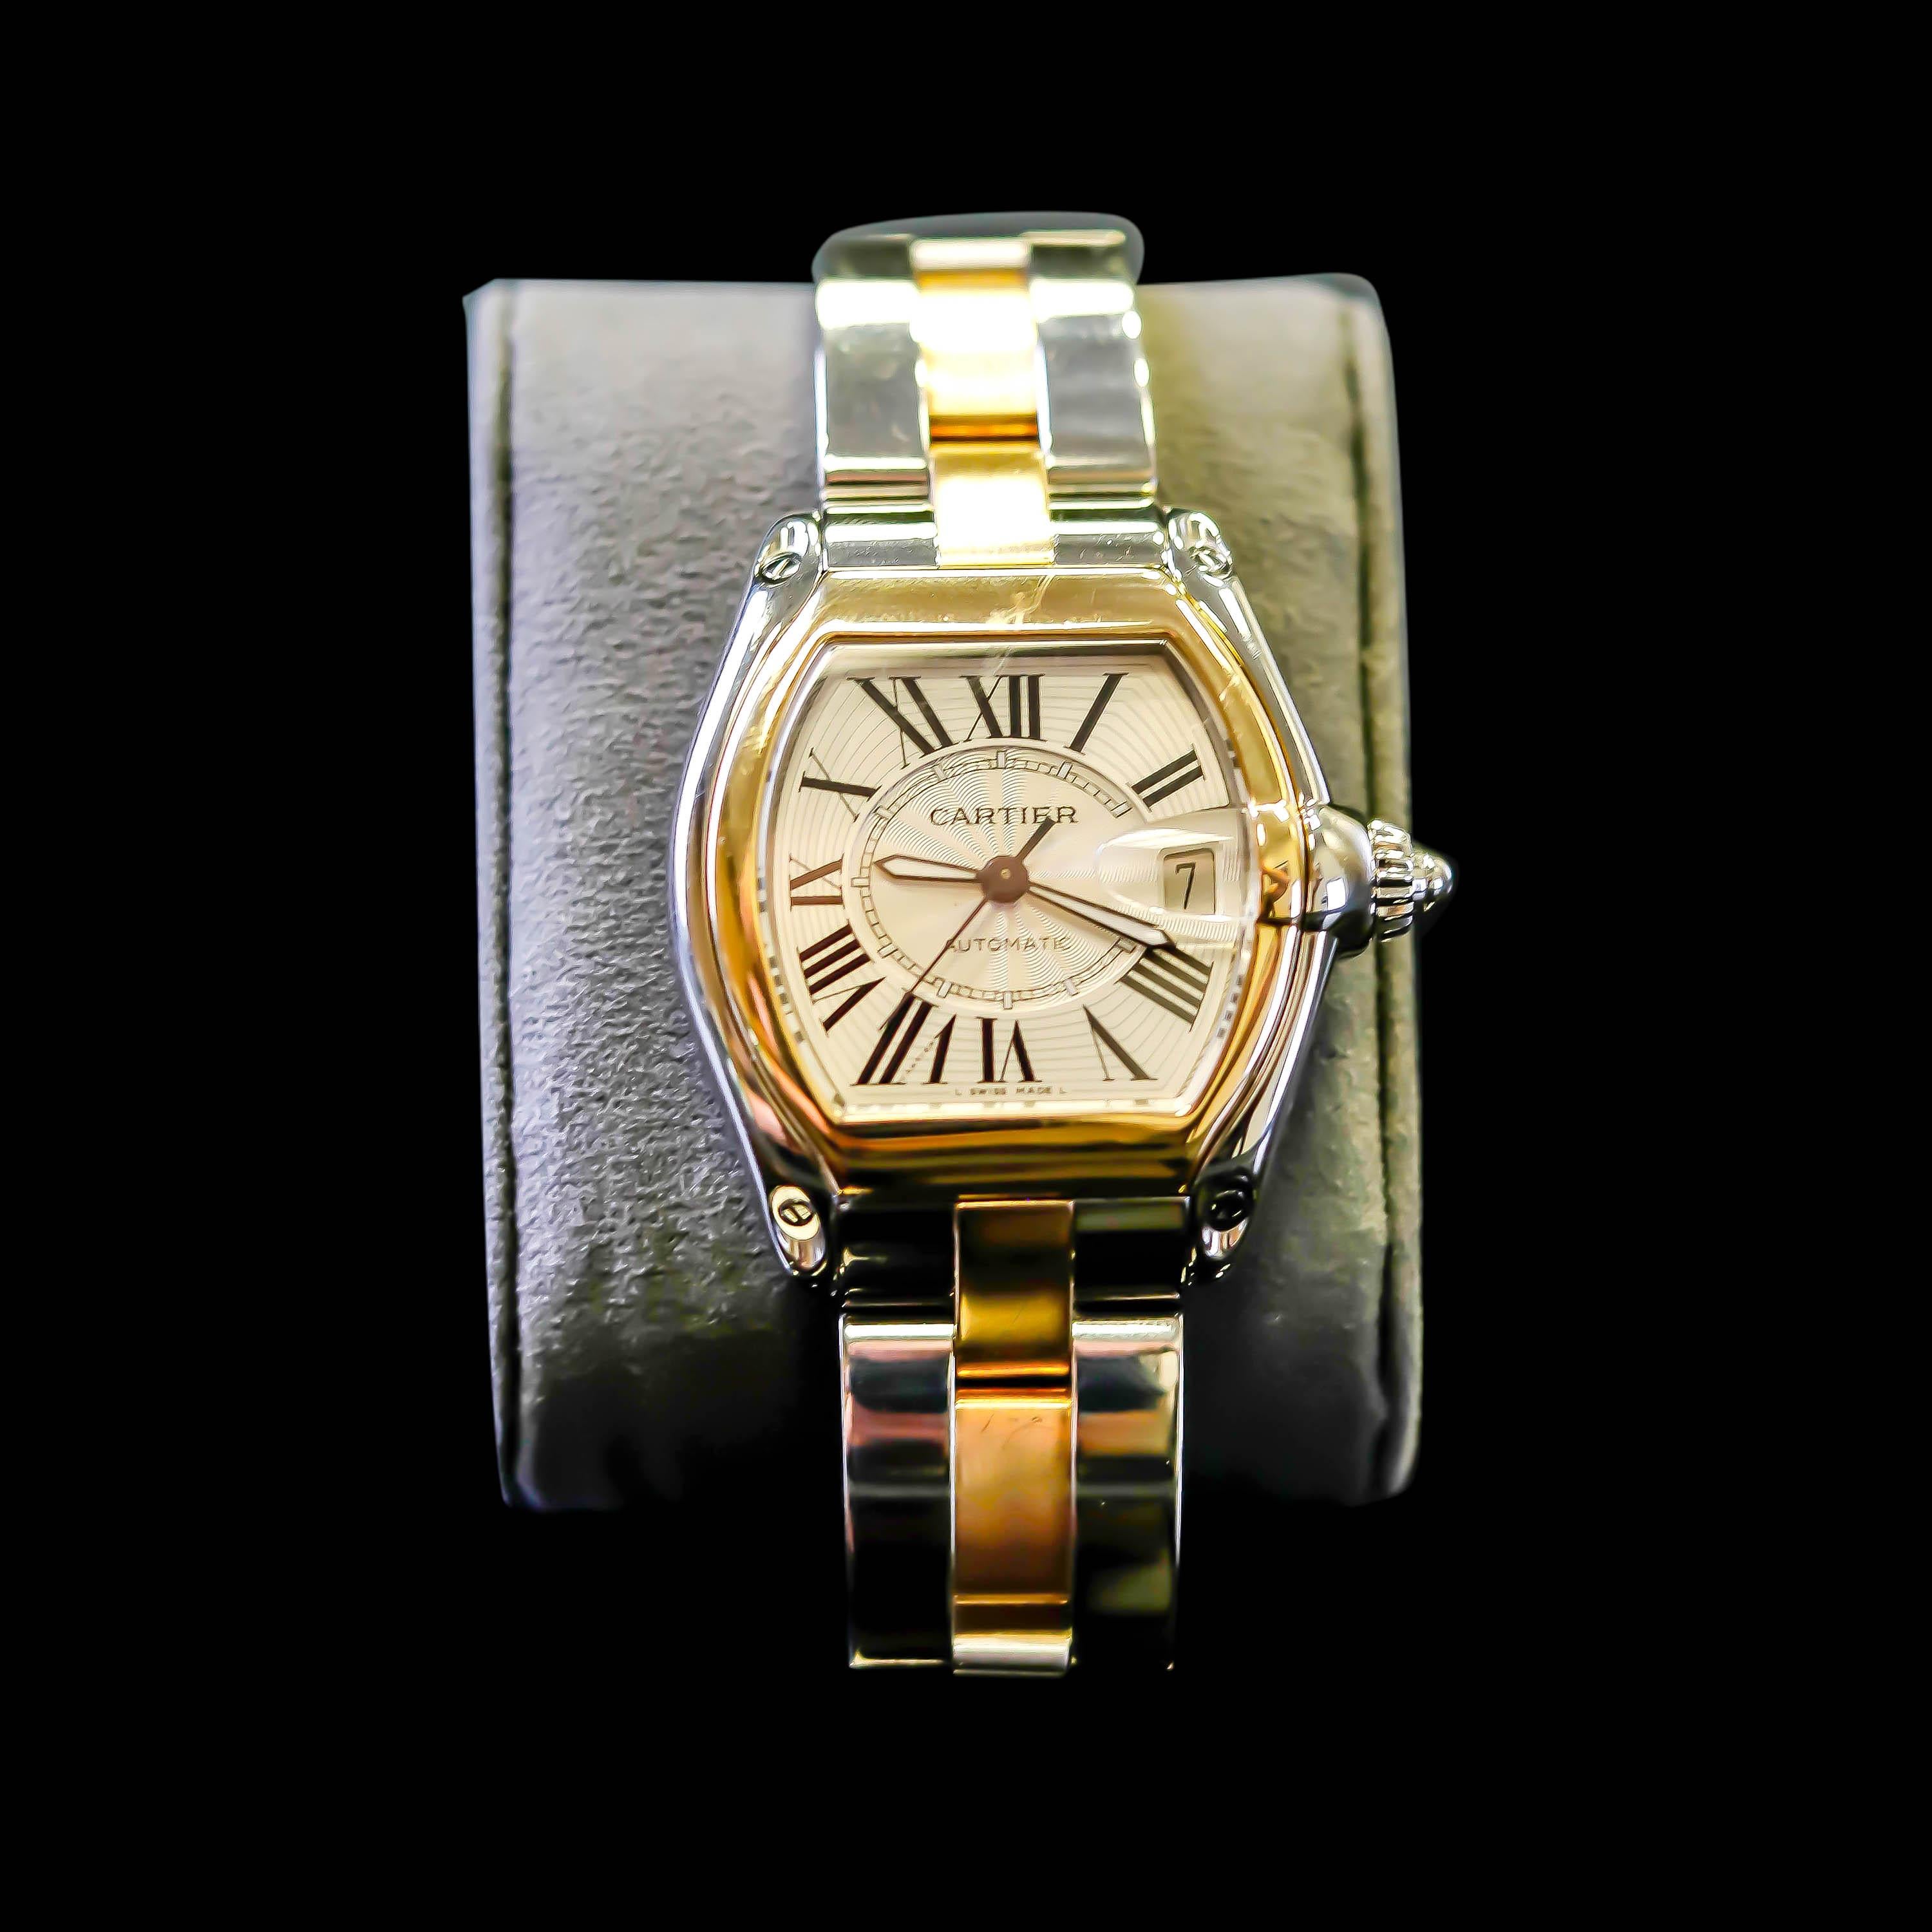 Cartier Two-Tone 18 Karat Gold and Stainless Roadster Large Size Mens Watch 2510 For Sale 3